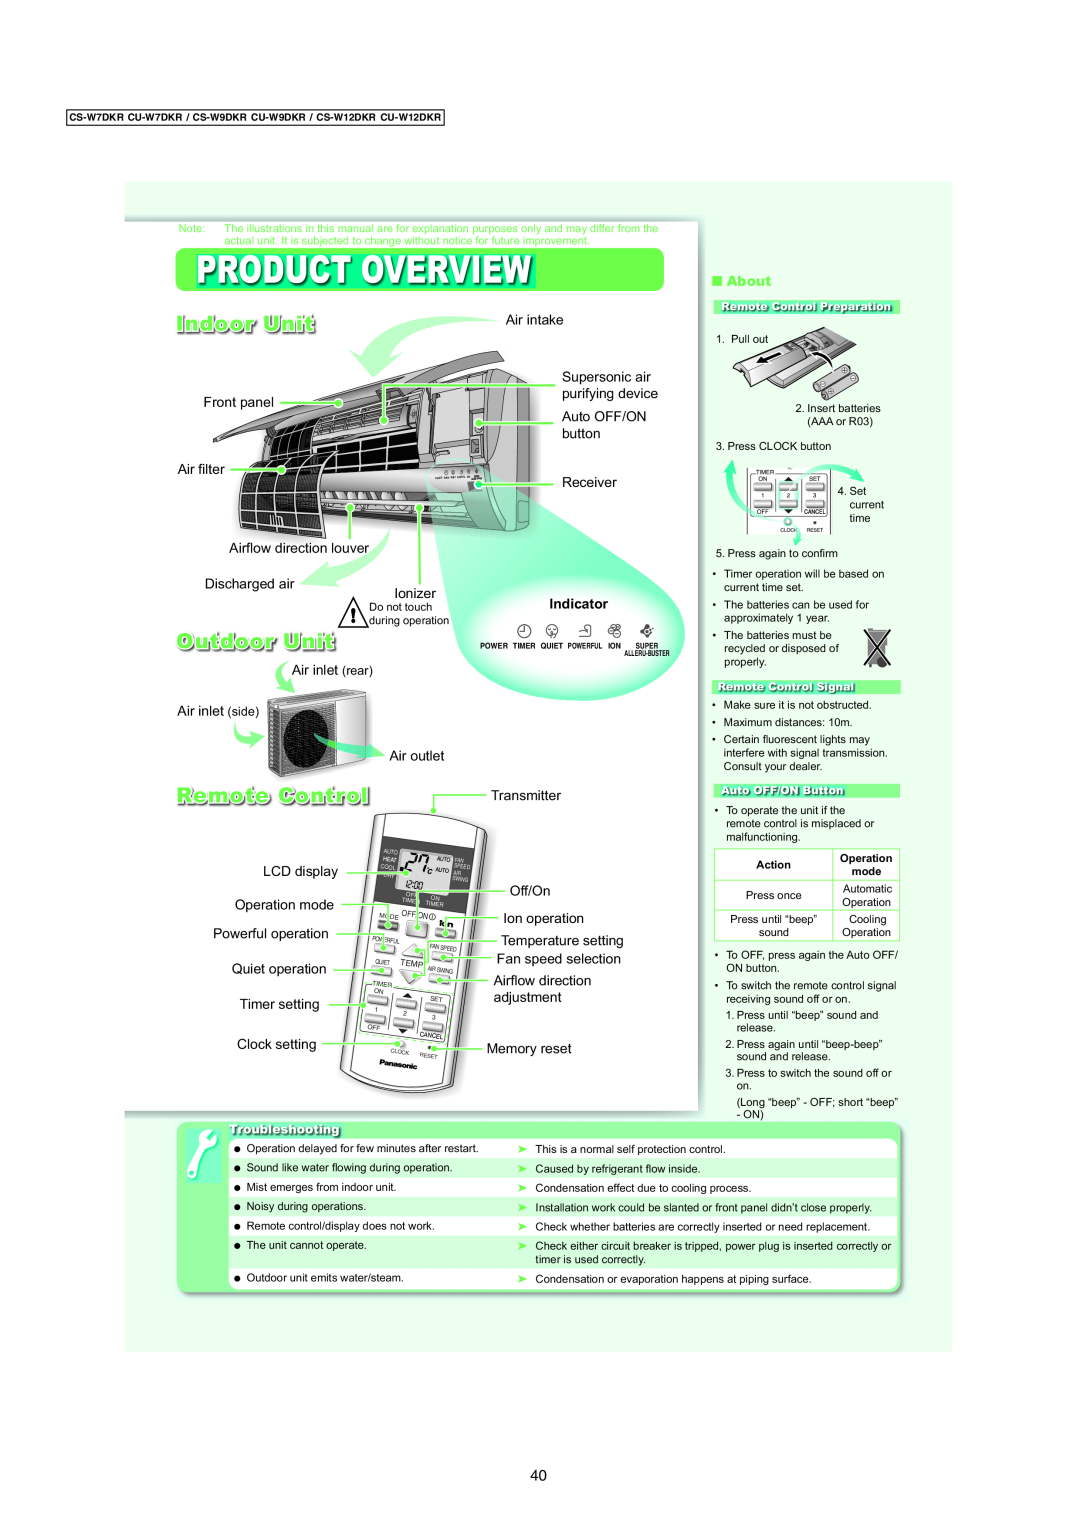 Panasonic CS-W9DKR, CS-W12DKR, CS-W7DKR, CU-W7DKR manual Product Overview, Indoor Unit, Outdoor Unit, Remote Control, About 